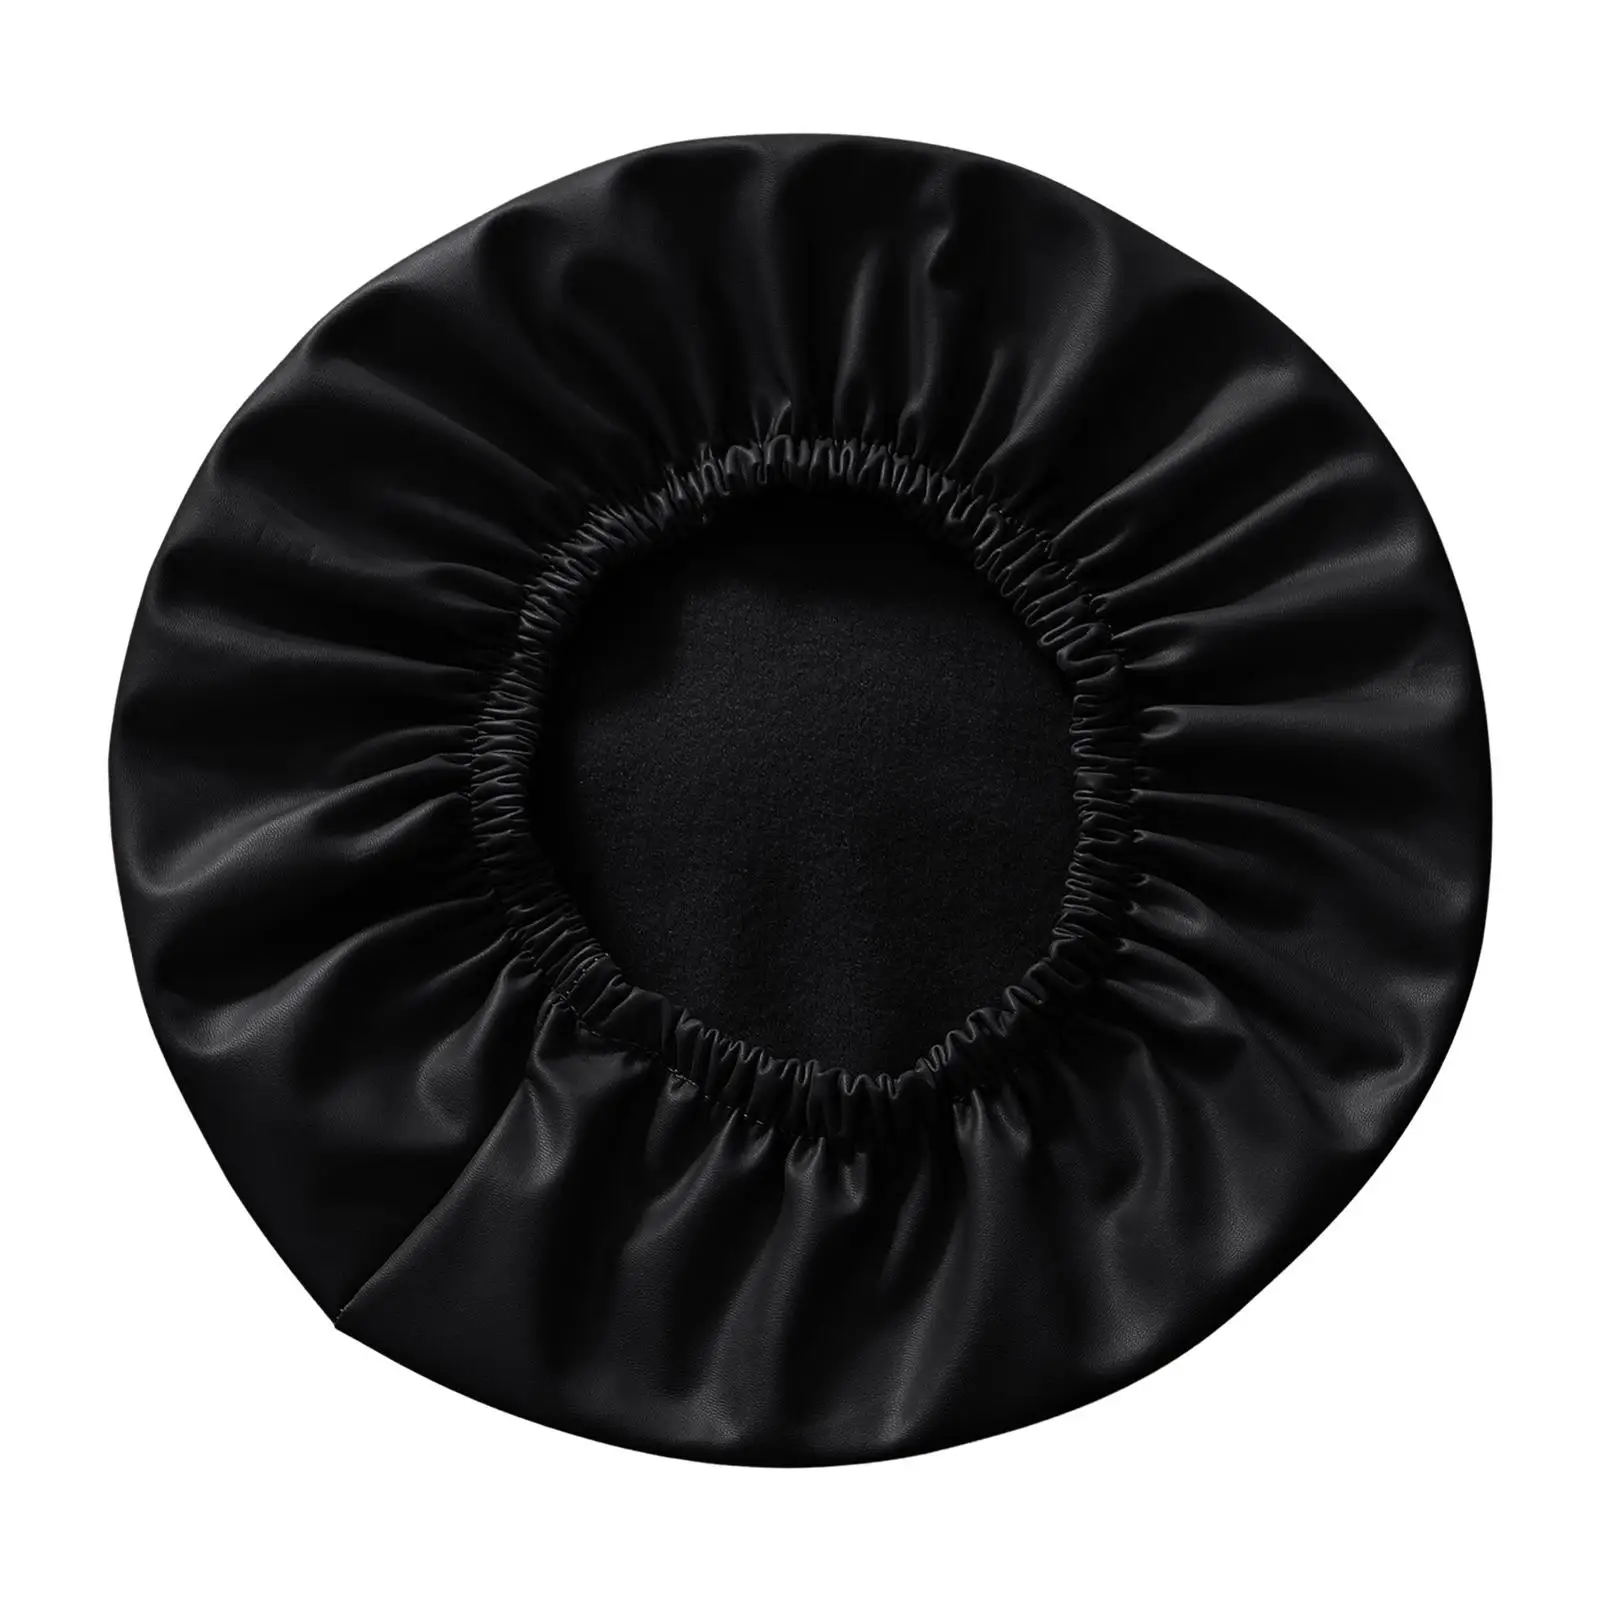 Elastic PU Leather Round Stool Chair Cover Waterproof Pump Chair Protector Small Round Seat Cushion Sleeve(no chair)